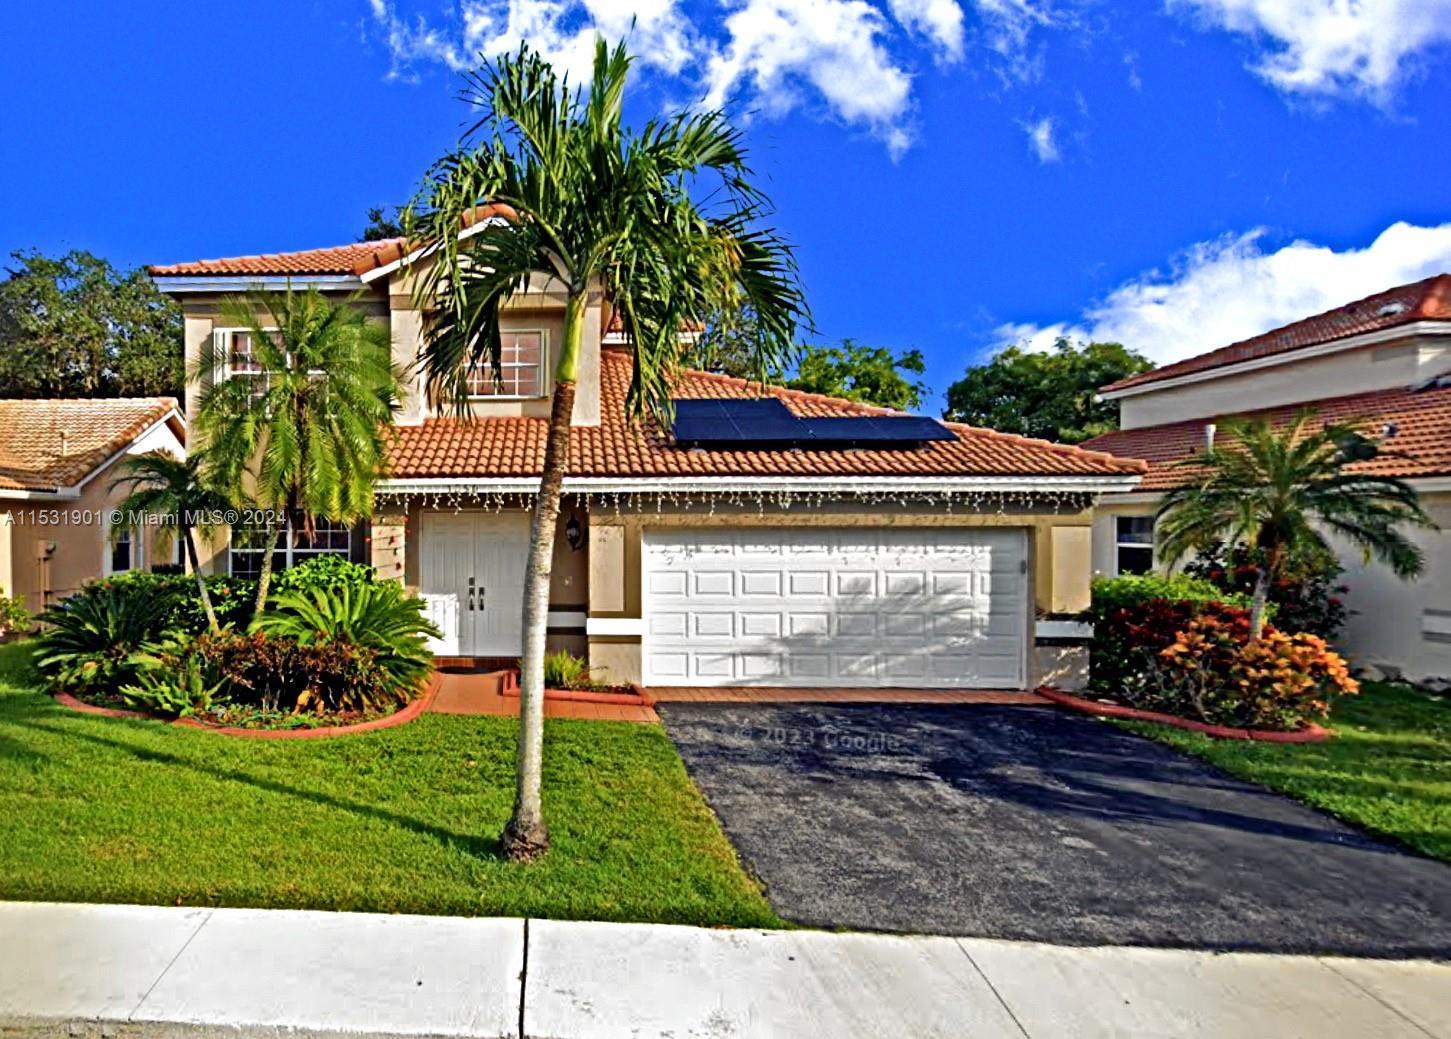 Photo of 1350 NW 129th Ave in Sunrise, FL